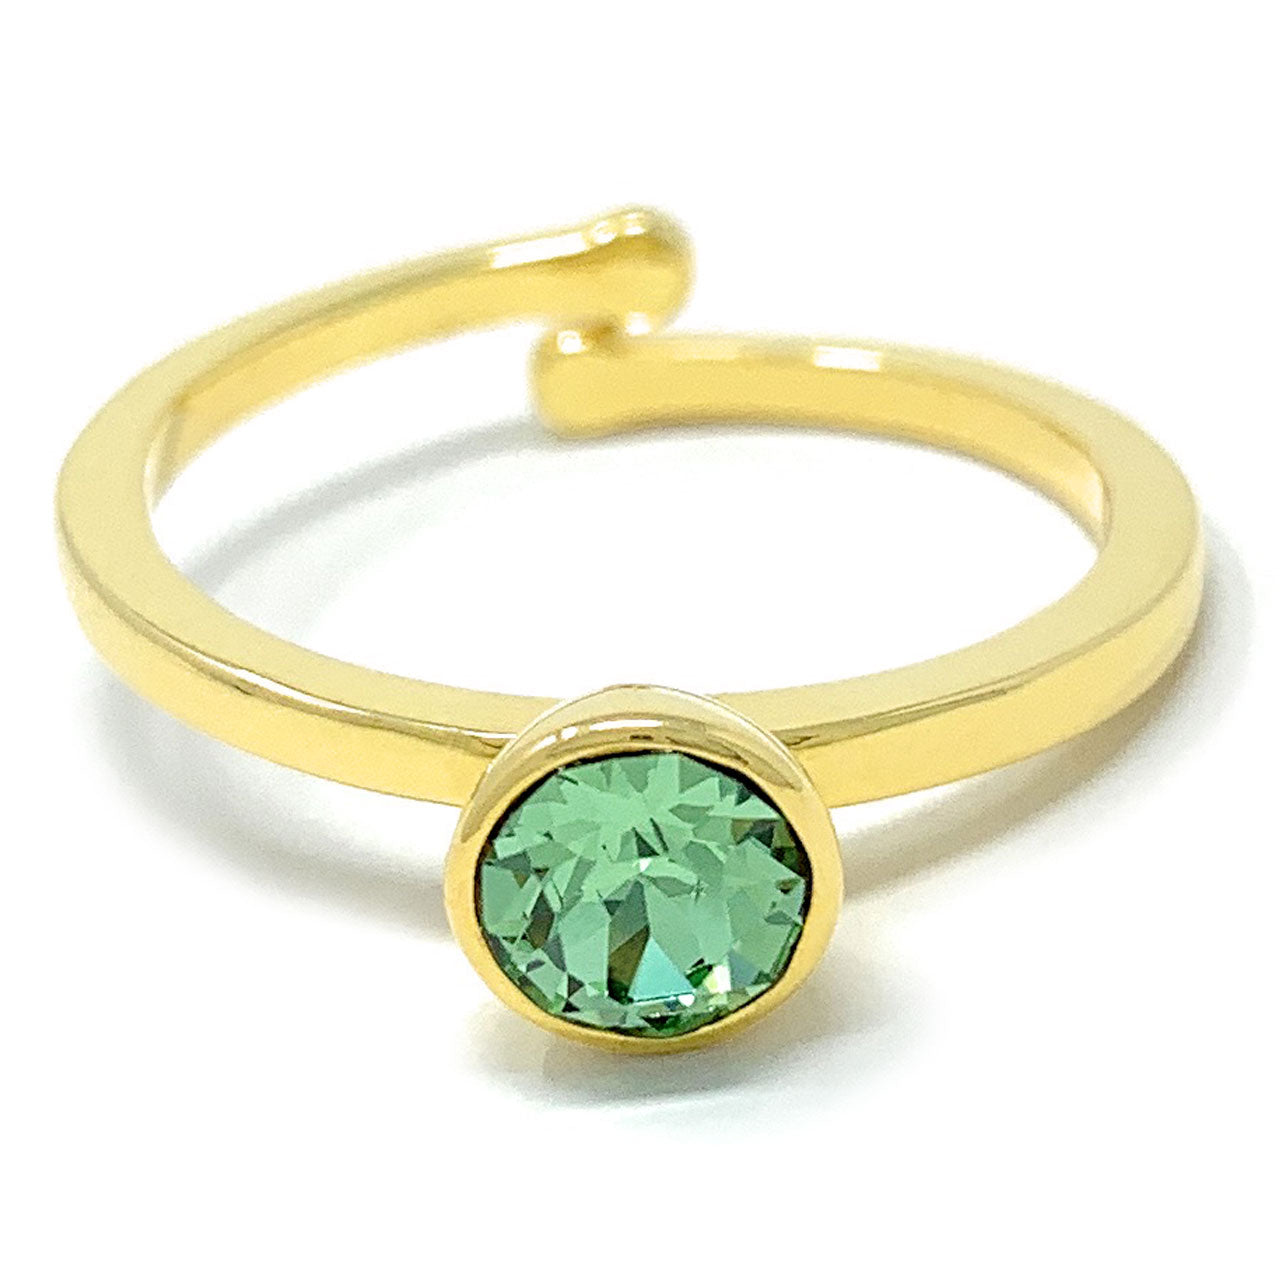 Harley Adjustable Ring with Green Peridot Round Crystals from Swarovski Gold Plated - Ed Heart